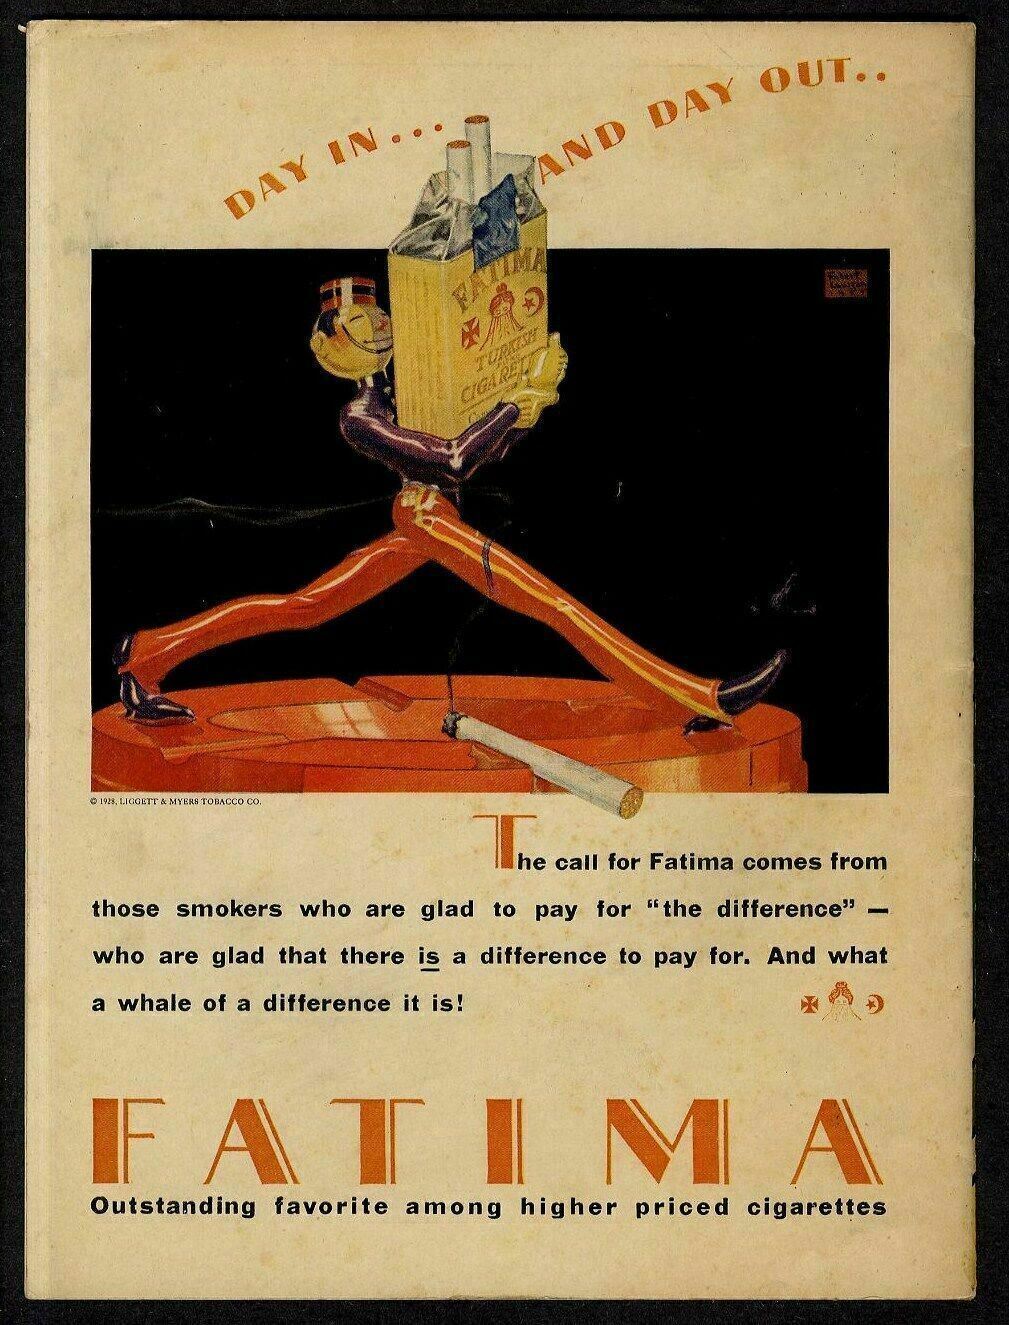 FATIMA HIGH PRICE CIGARETTES FOR SMOKERS WHO ARE GLAD TO PAY THE DIFFERENCE